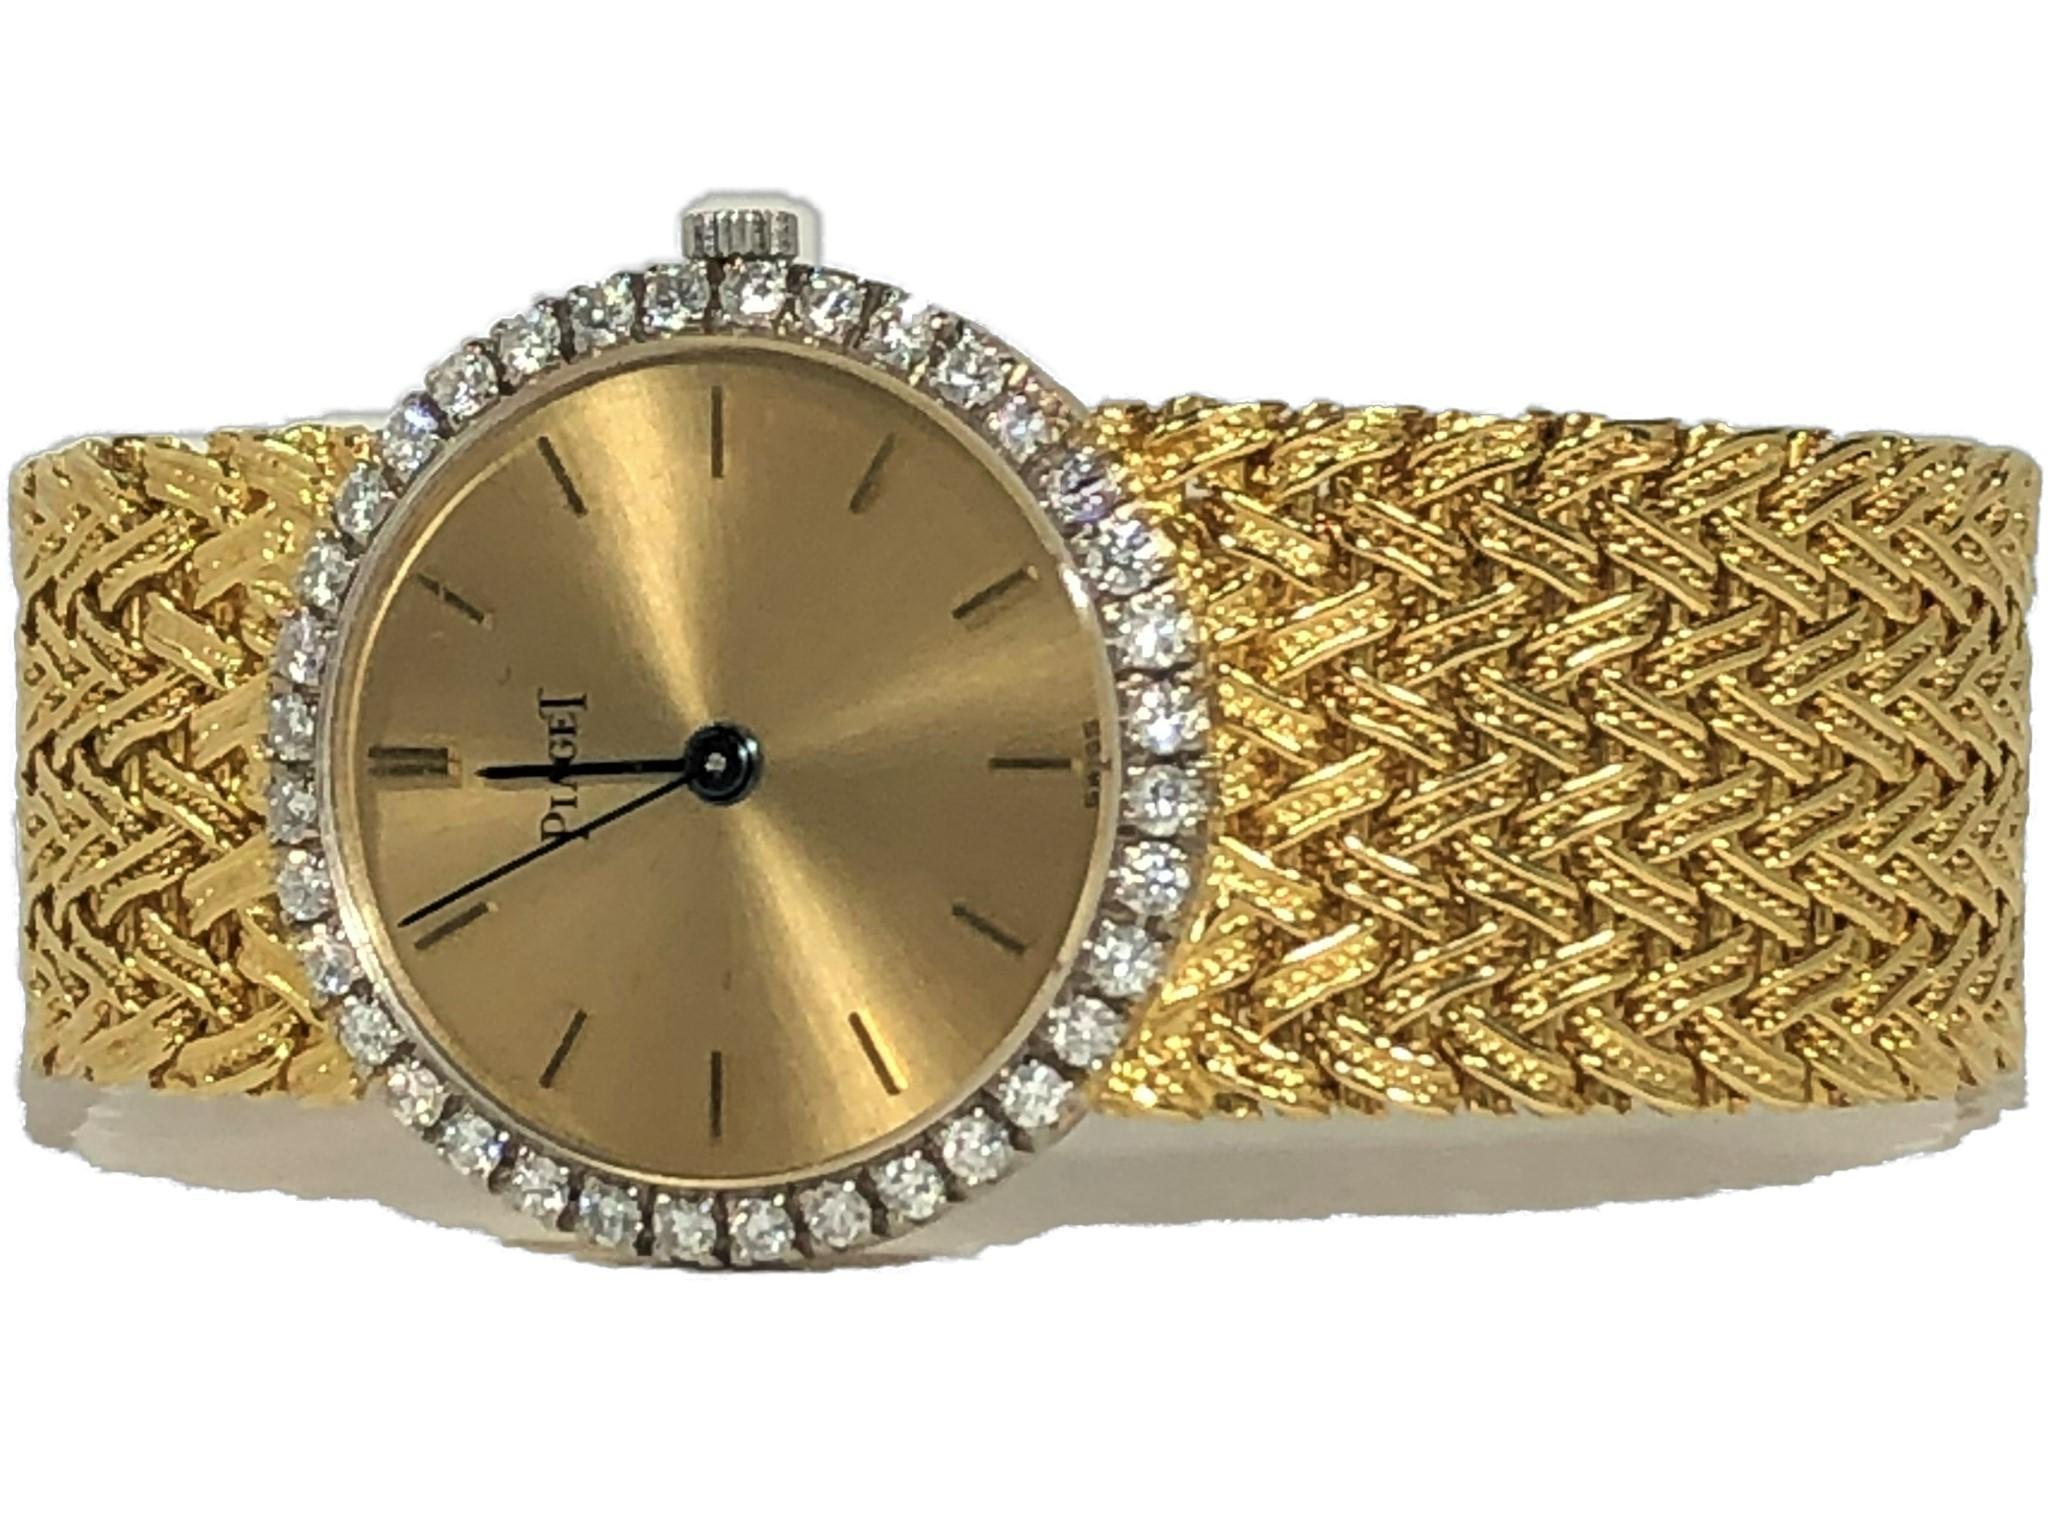 Classic Gold Piaget Watch with Champagne Dial and Diamond Bezel 1